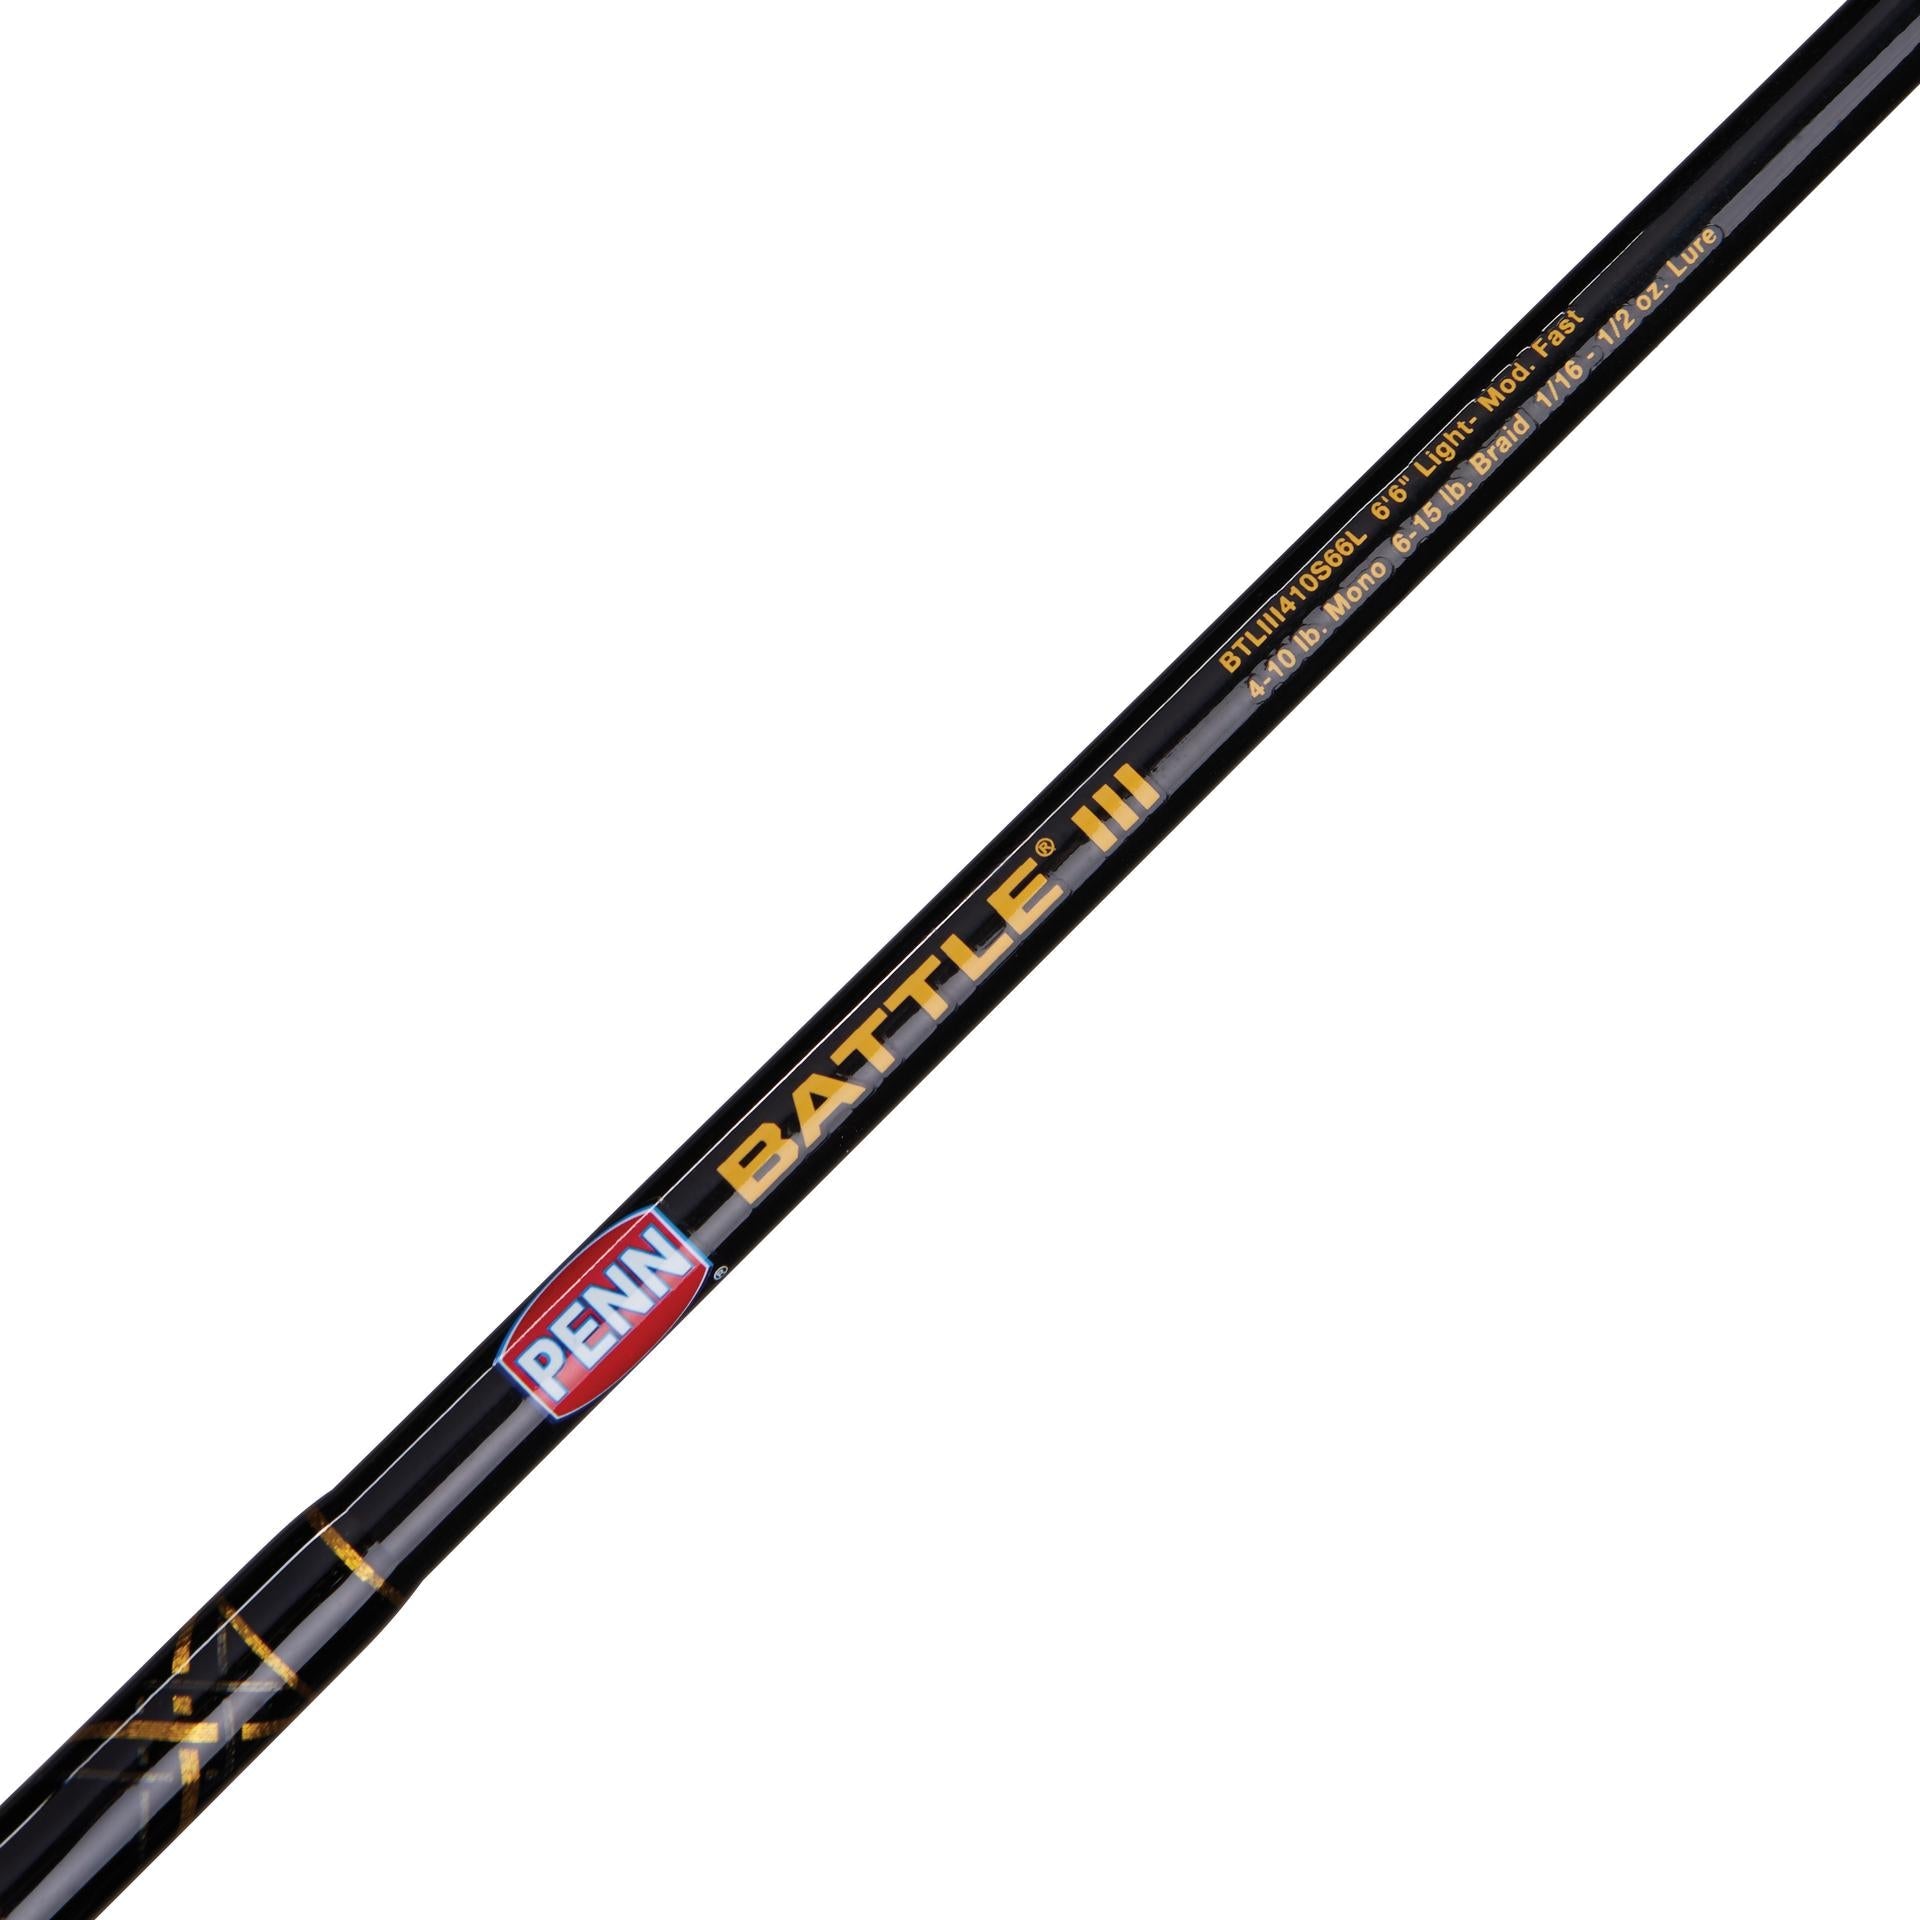 What rod would fit well with a Penn Battle 2 reel for salmon fishing in  primarily rivers? so longer, good salmon fishing rod, but not super  pricey.. : r/Fishing_Gear